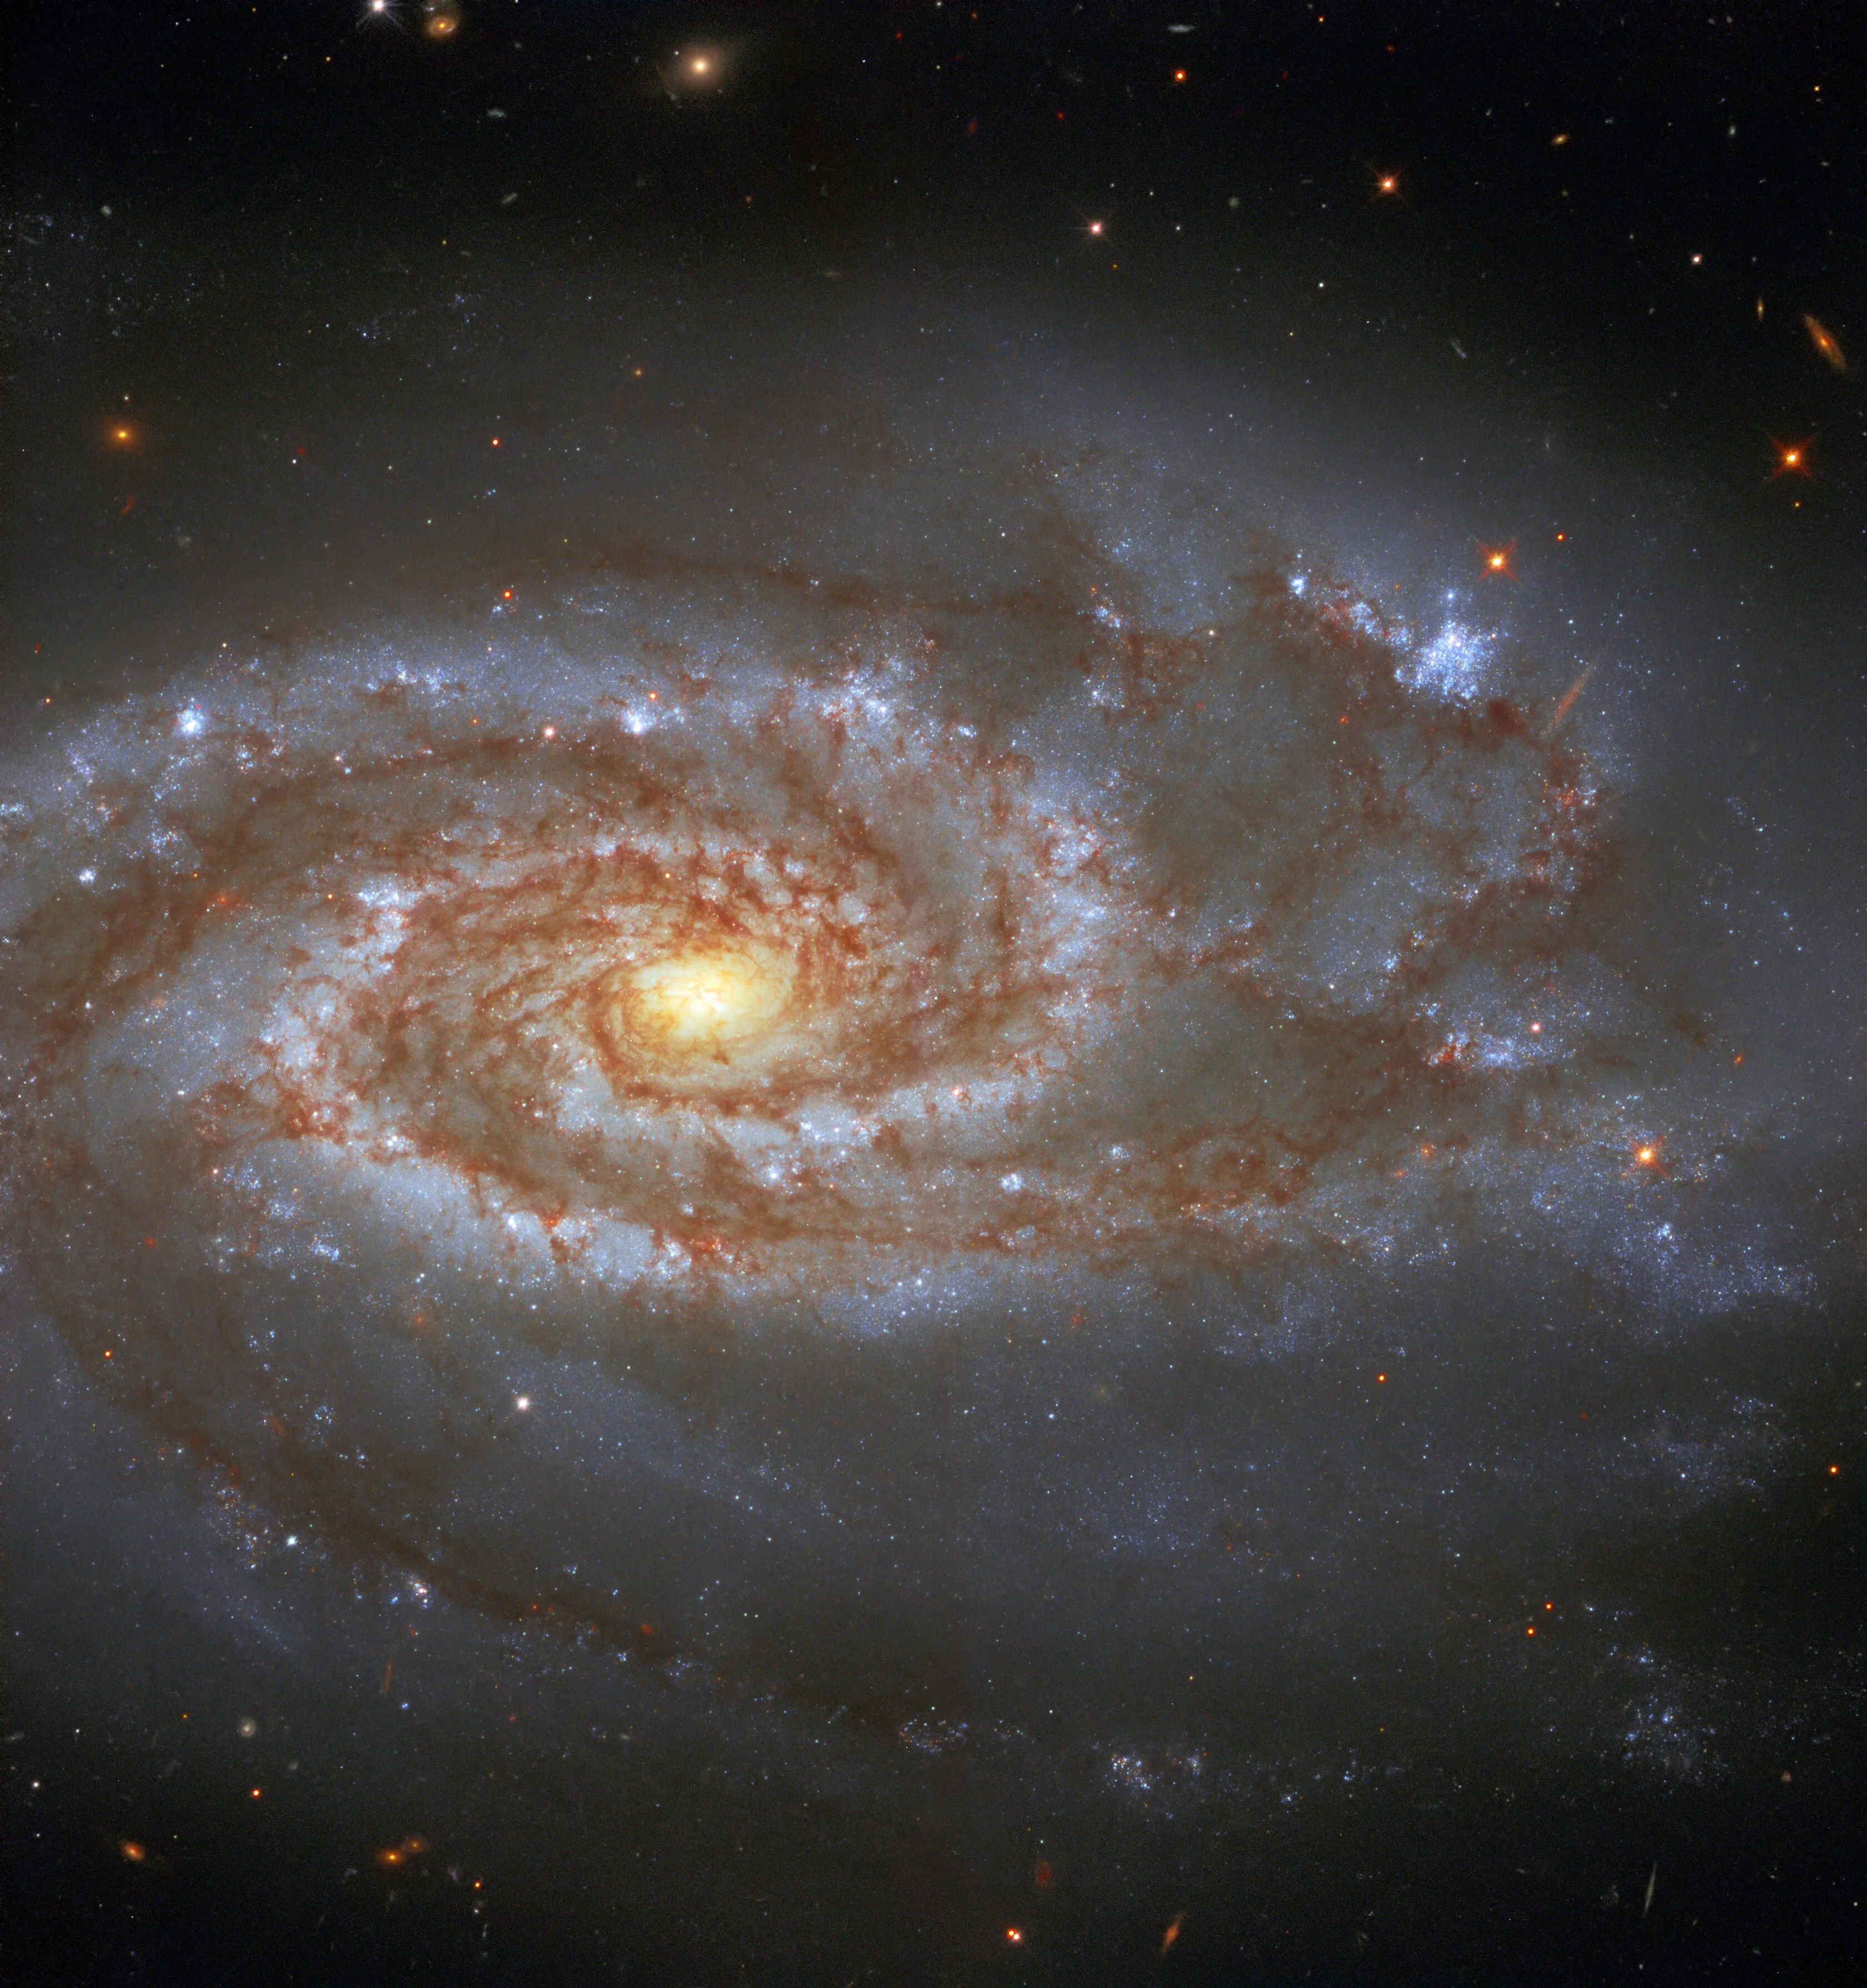 Spiral galaxy ngc 5861 as viewed by hubble